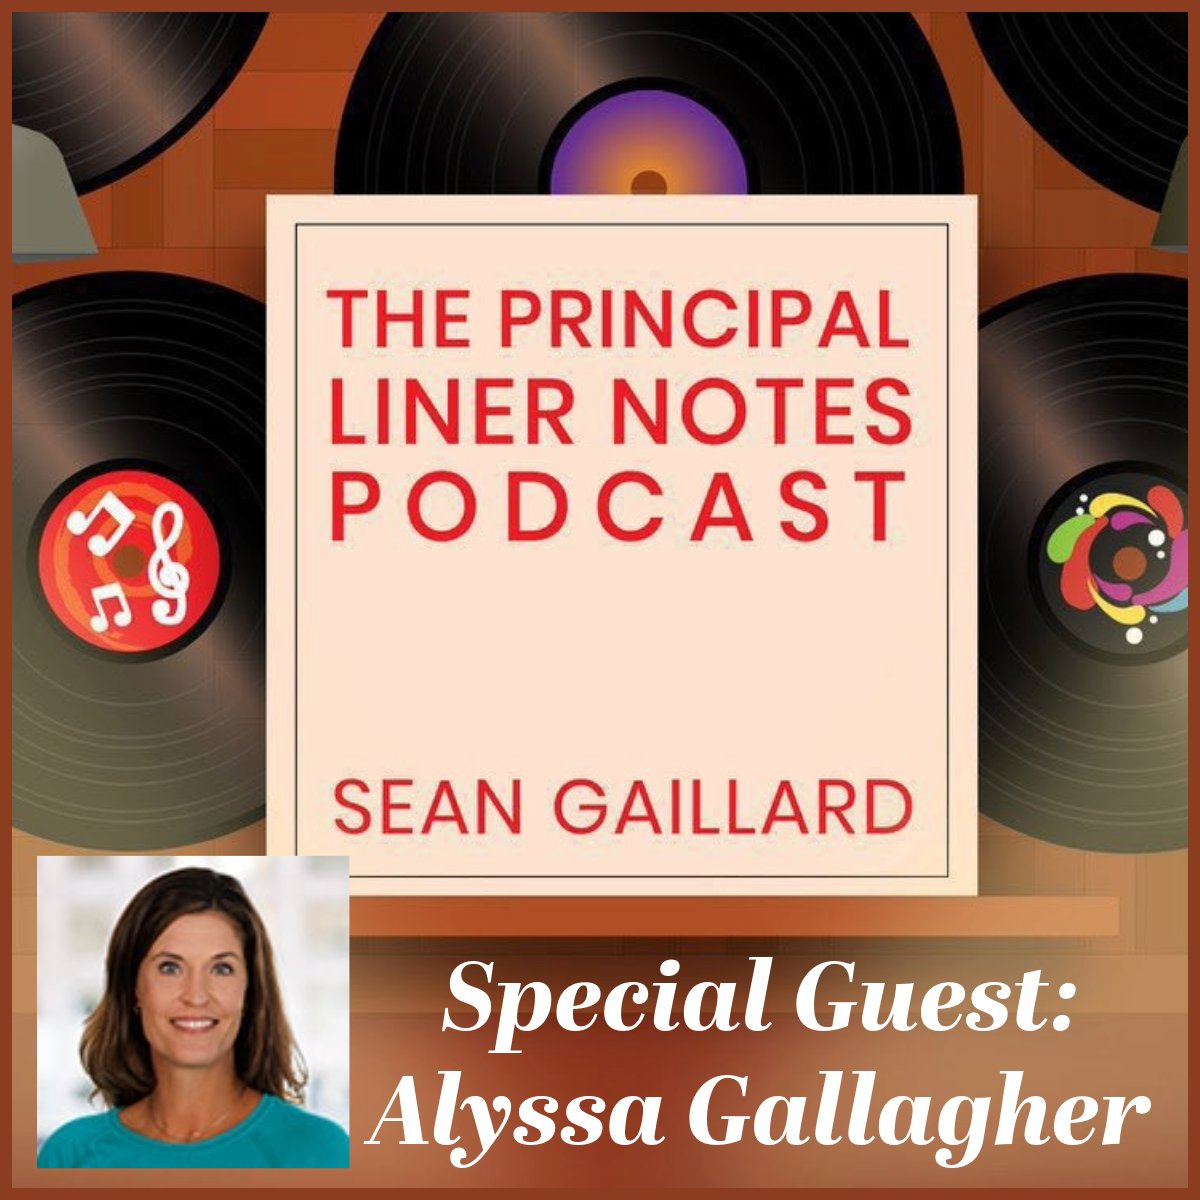 Tune in for the latest episode of #PrincipalLinerNotes featuring author and leadership coach, Alyssa Gallagher of BTS Spark. 🎙️Listen: podcasters.spotify.com/pod/show/sean-… 📽️ View on YouTube: youtu.be/nT470PcYDNA @ASCD @ToddWhitaker @btssparkus @jenniferlmoroz